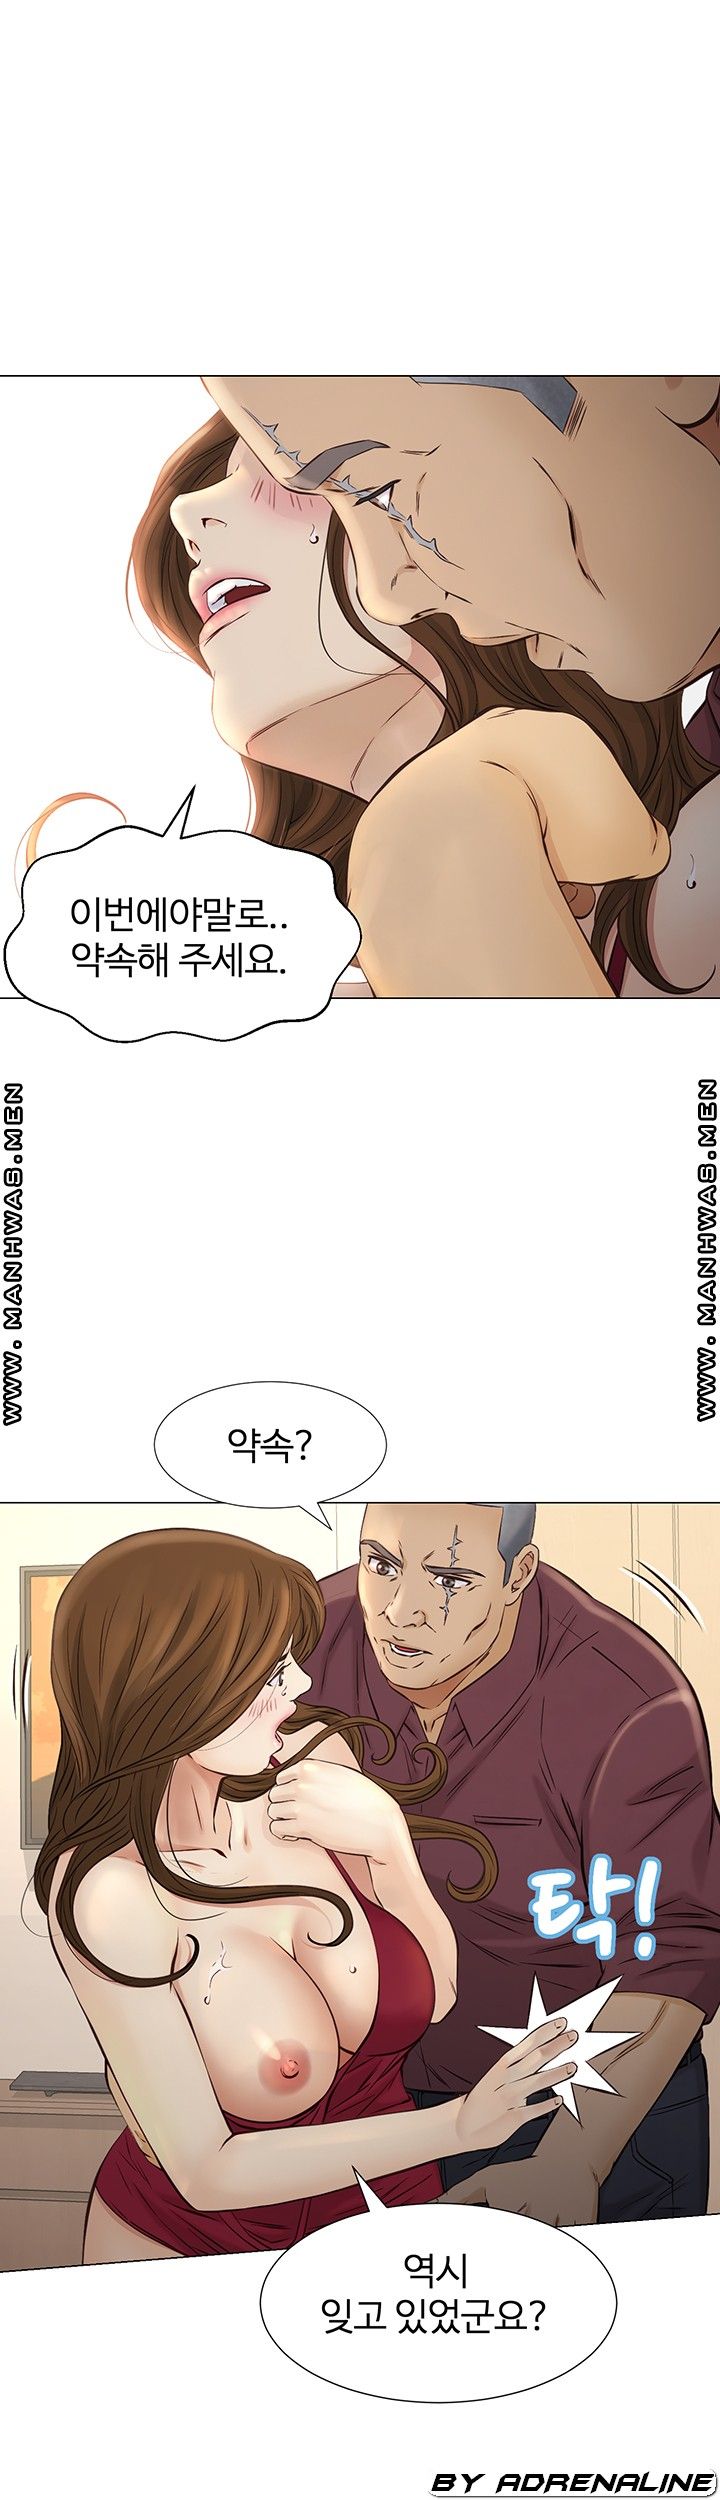 Gamble Raw - Chapter 56 Page 7